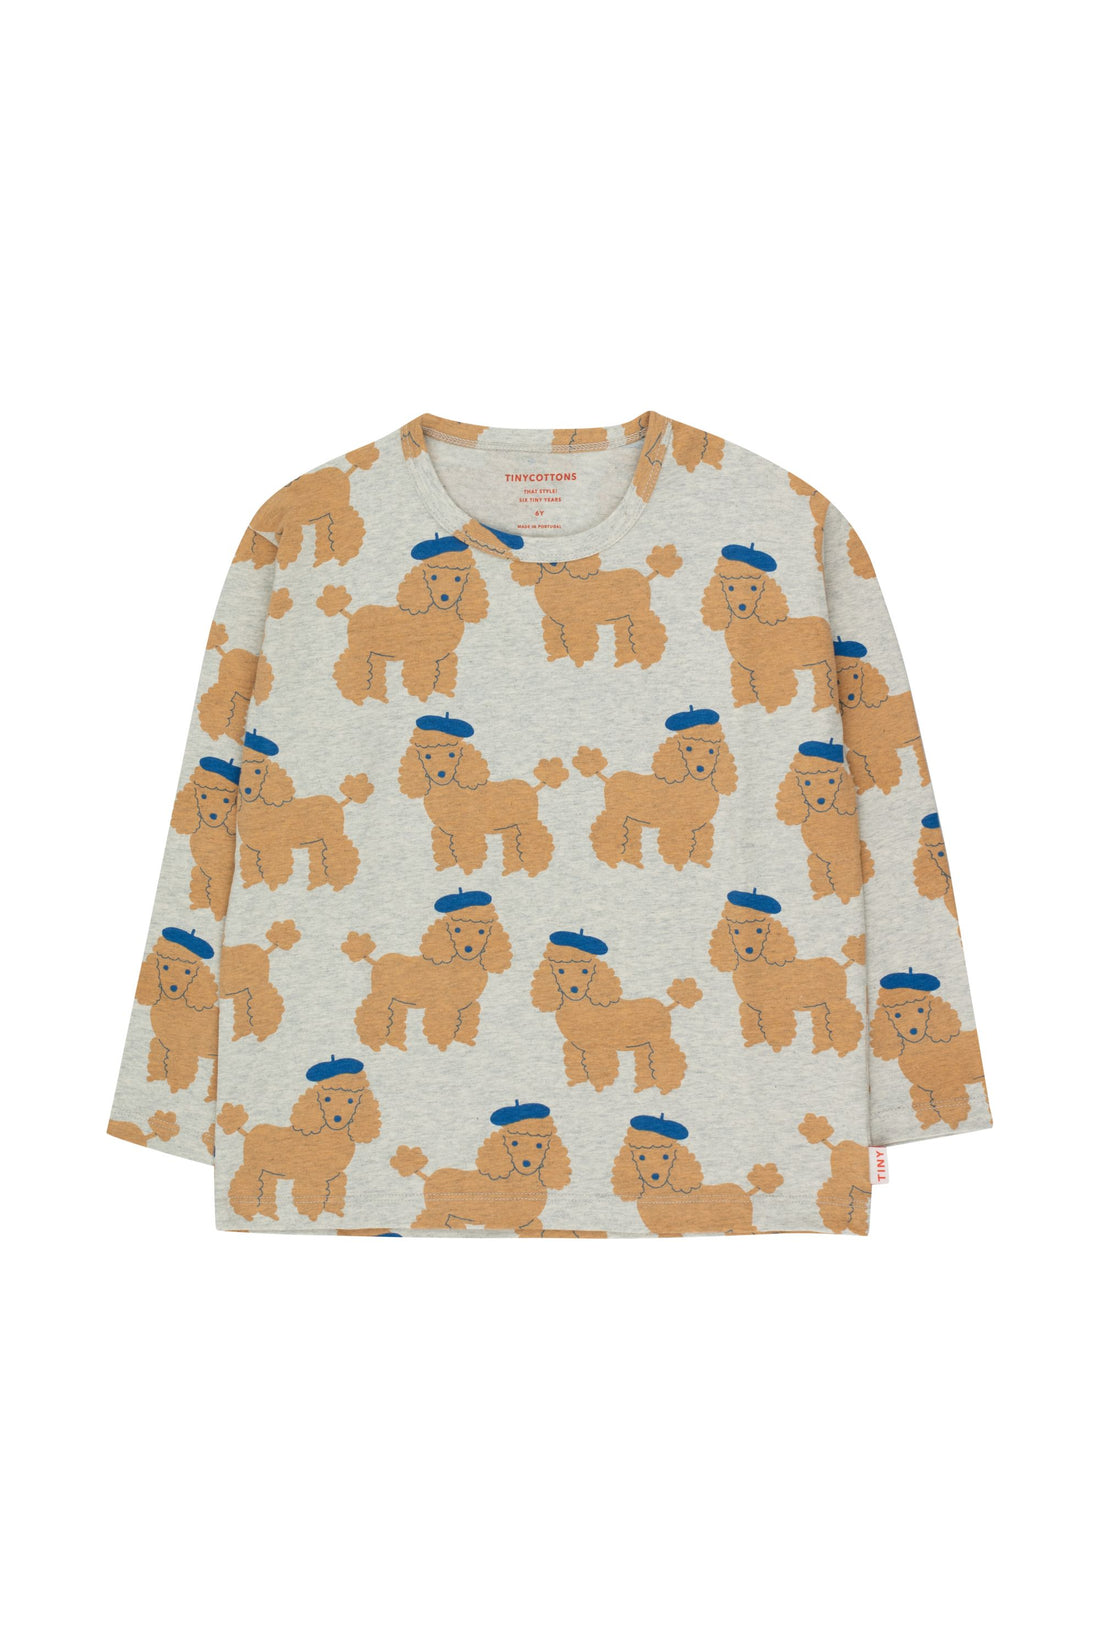 Tiny Cottons - poodle tee - light grey heather